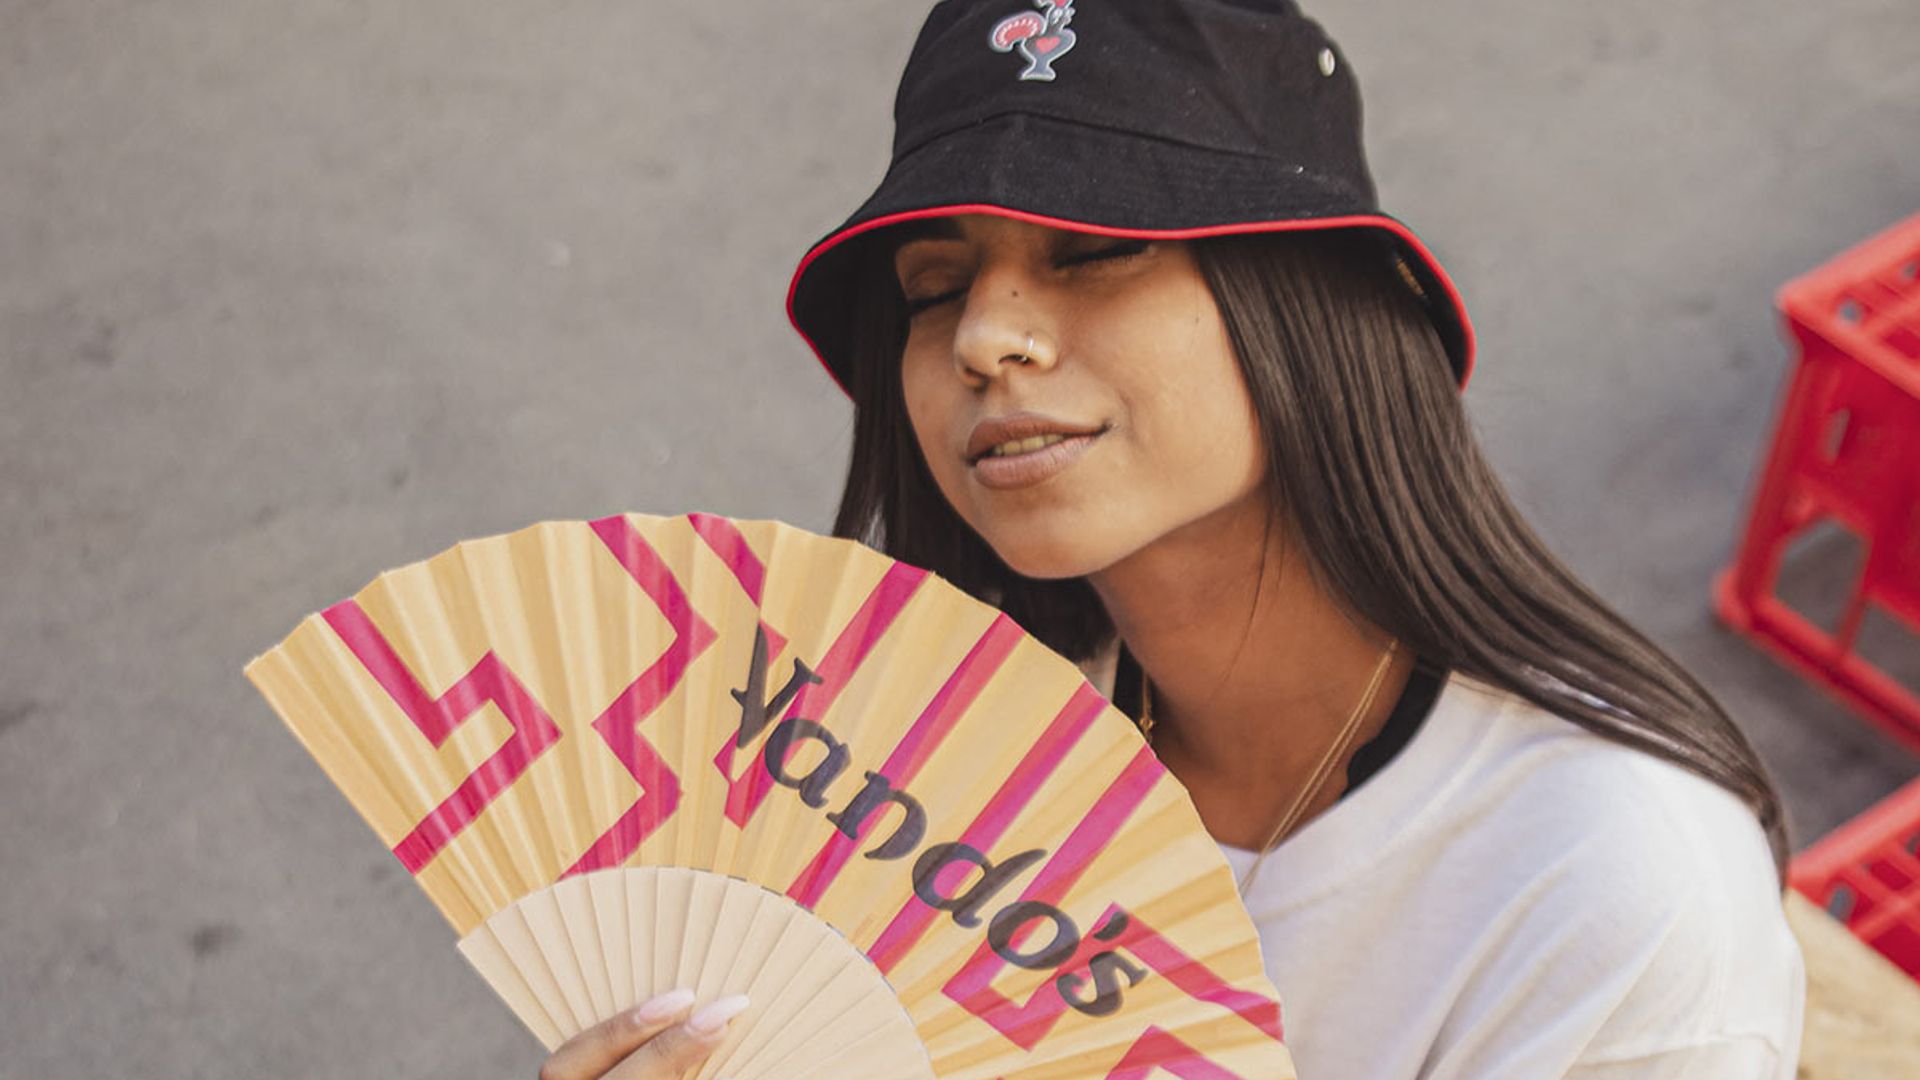 Love Nando's? You can now buy official merch and impress literally EVERYONE you know